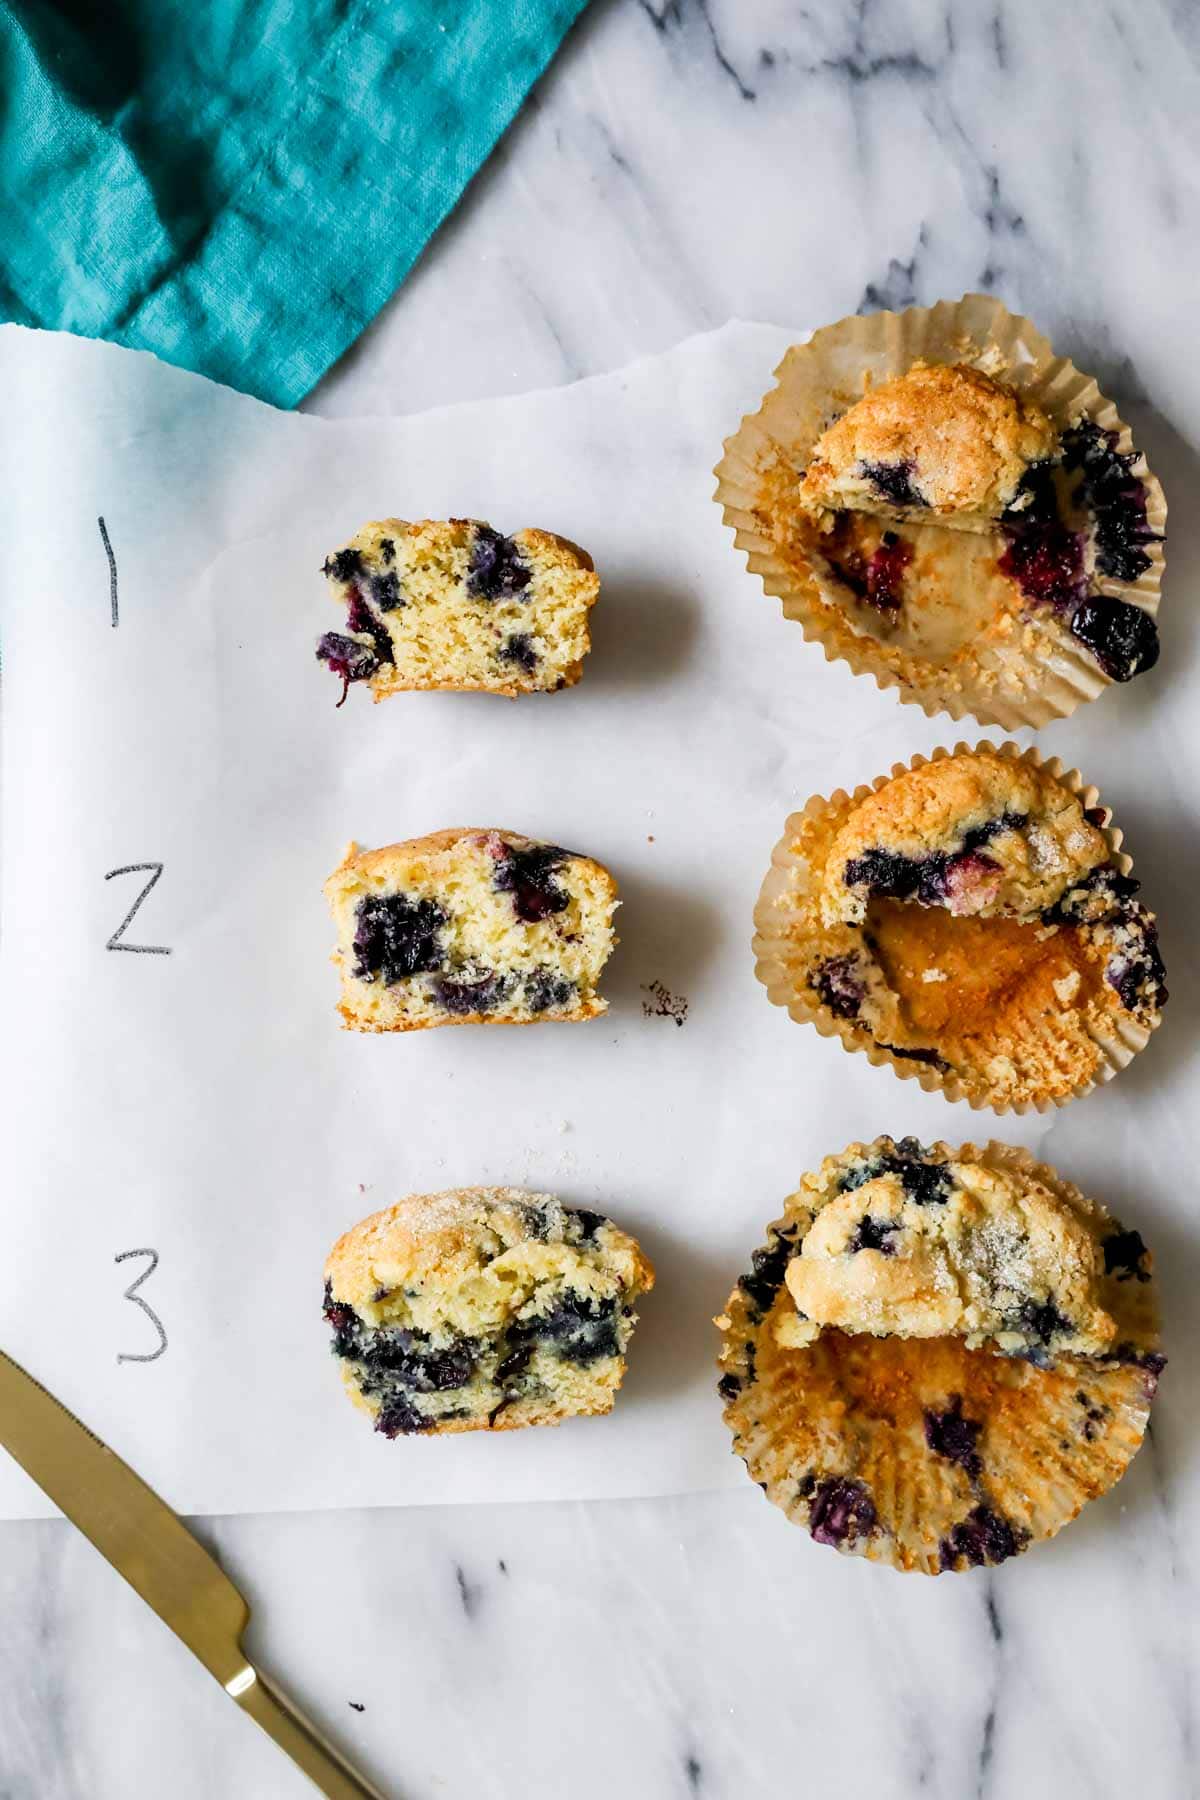 Overhead of 3 numbered blueberry muffins cut in half. 1 is shrunken with dense dry crumb, 2 is less shrunken with tight crumb, 3 has juicy berries and plush crumb 